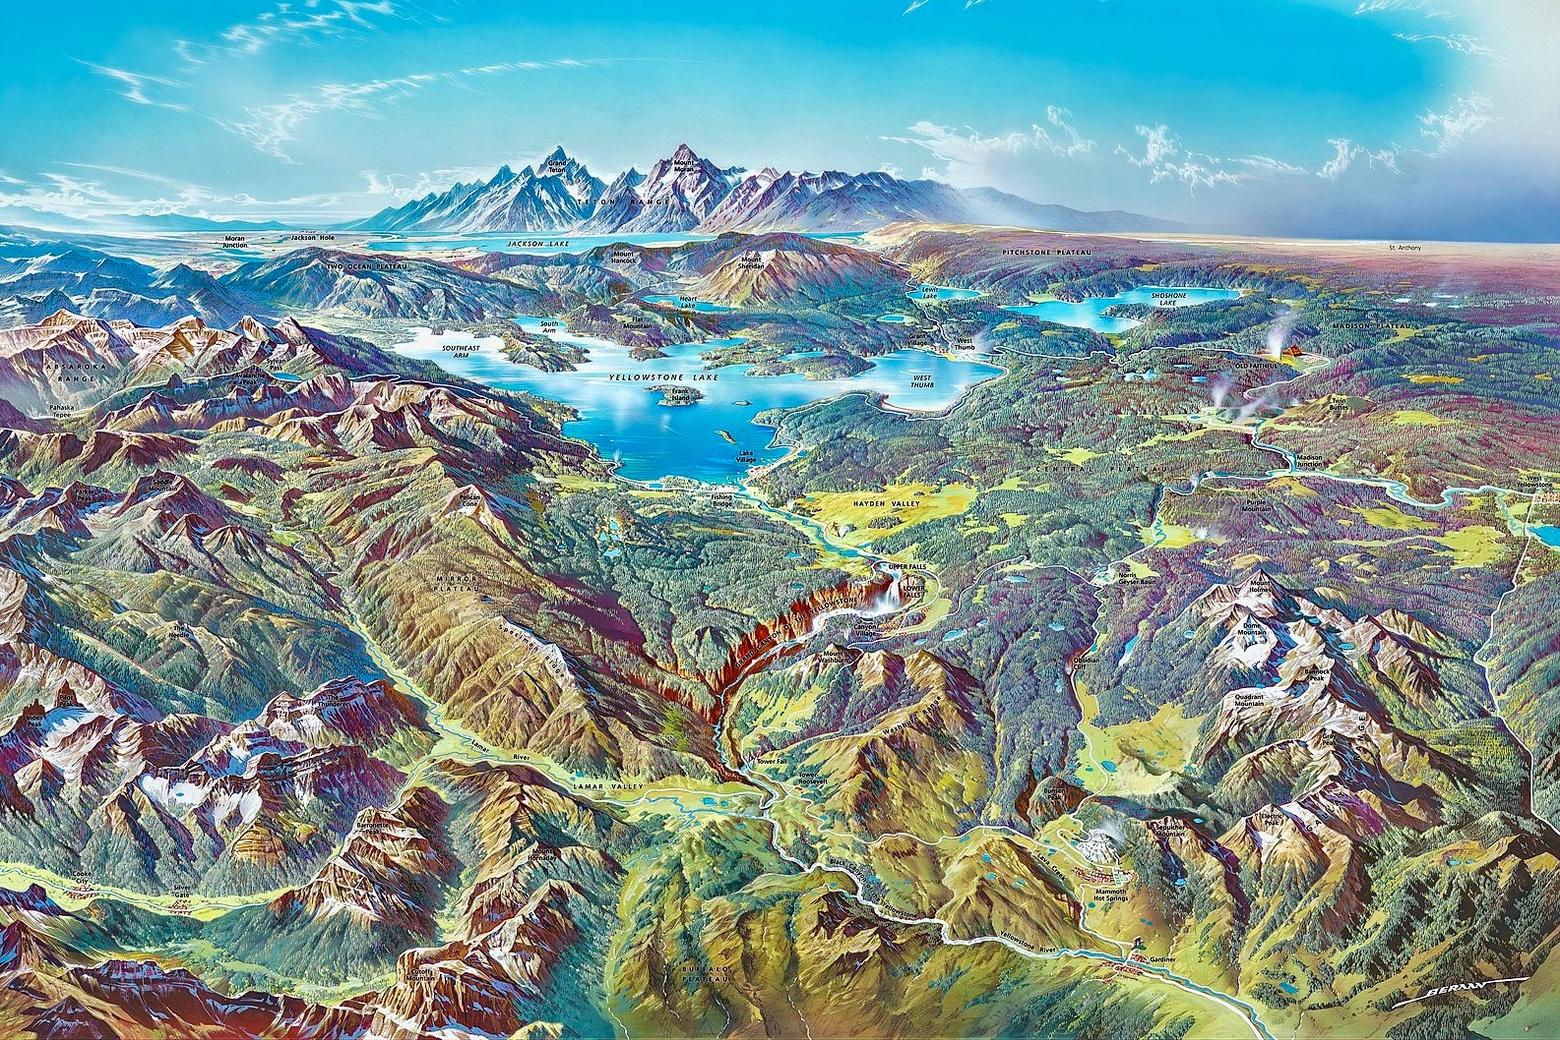 Heinrich Berran created this map of Yellowstone looking southwesterly toward the Tetons and into Idaho for the National Park Service decades ago. While the Greater Yellowstone Coordinating Committee is supposed to be leading the way in ecosystem thinking, many of its member agencies remain entrenched in their bureaucratic silos and have been absent in tackling issues like sprawl and industrial recreation that is negatively affecting public lands. 